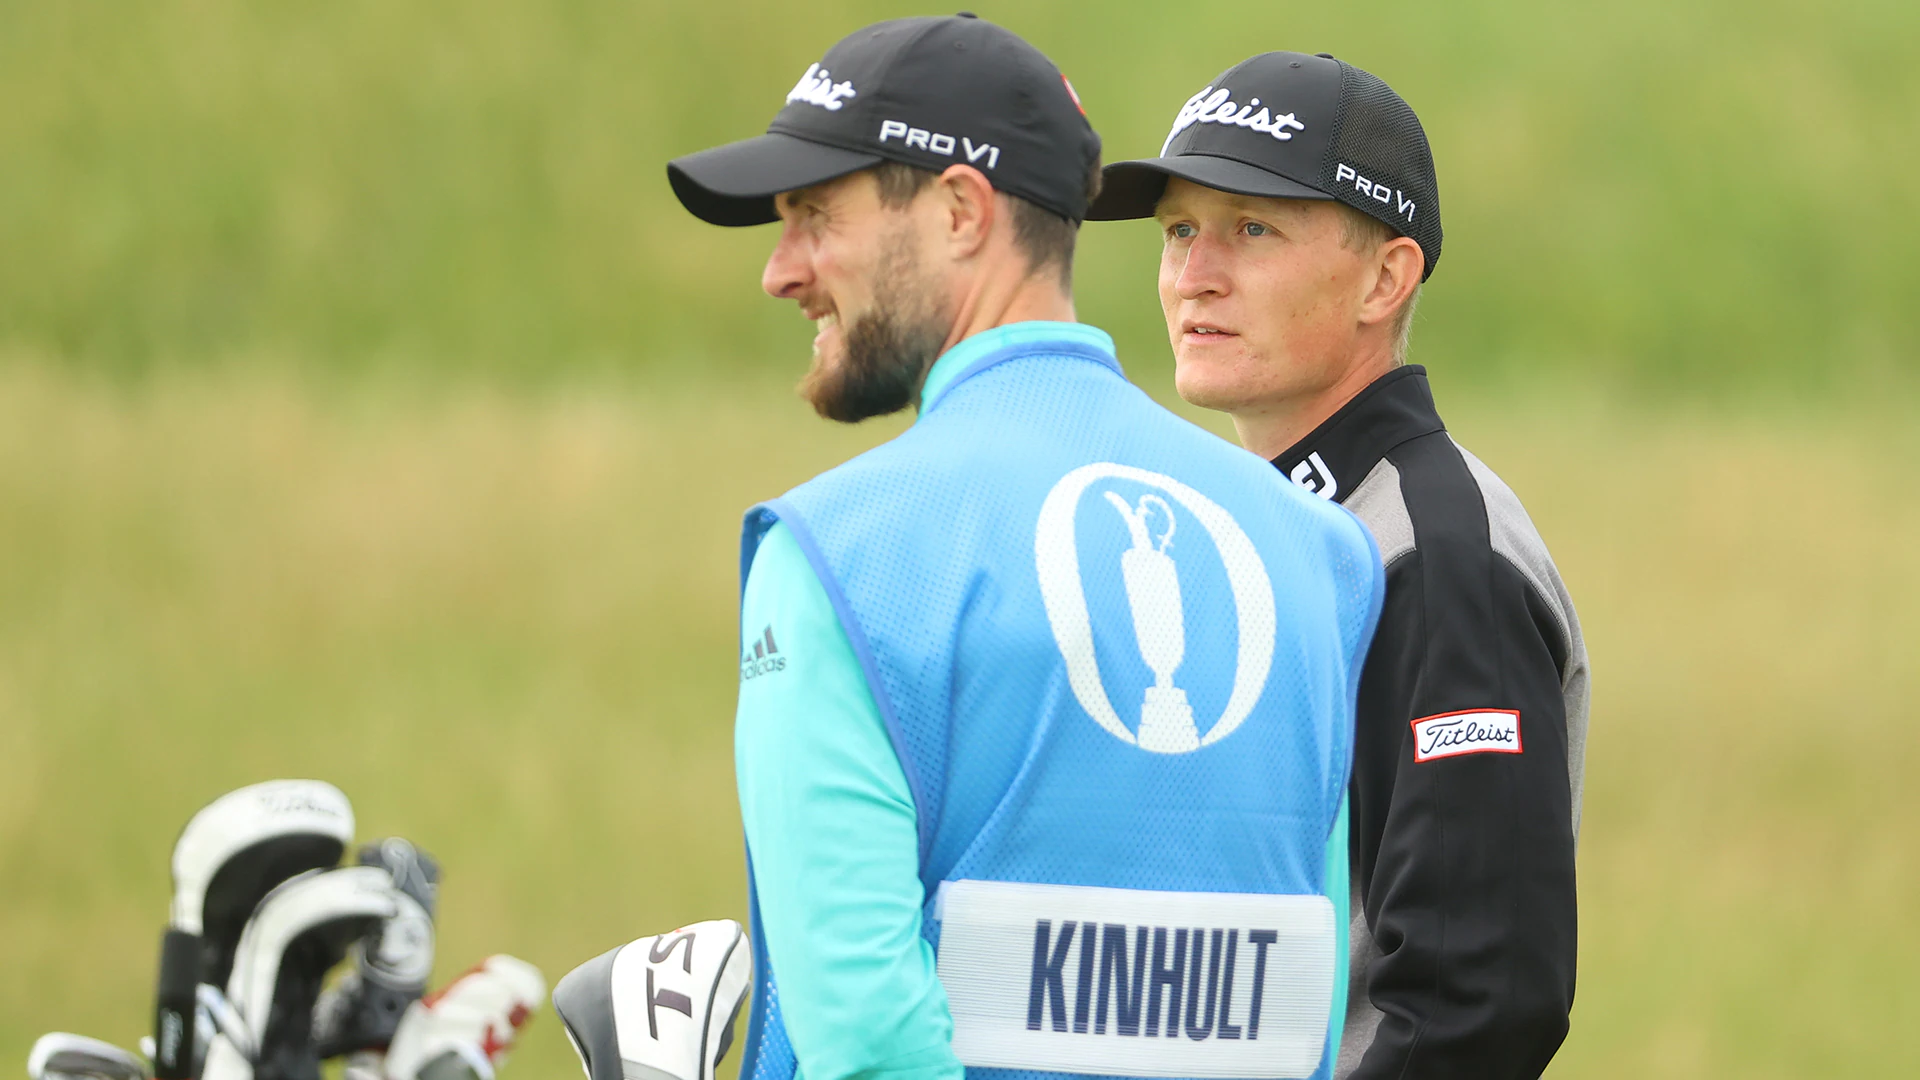 Marcus Kinhult returns to The Open, three months after health scare